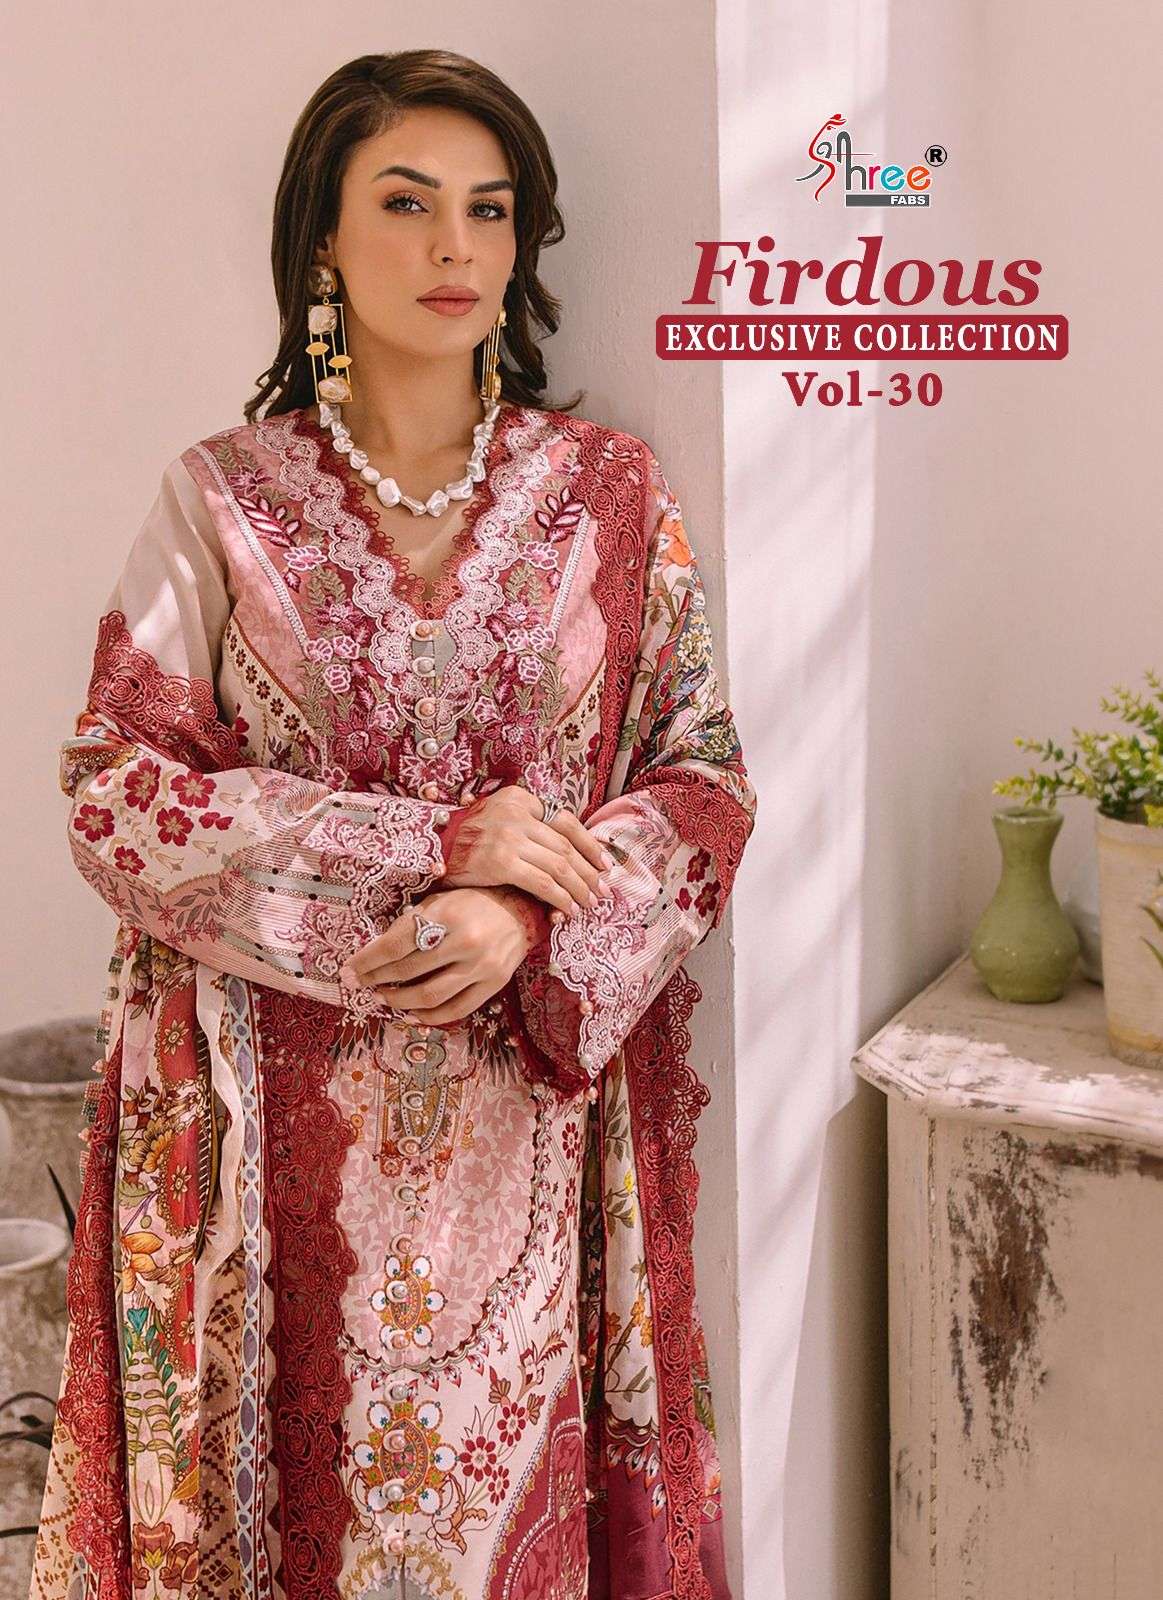 firdous exclusive collection vol 30 by shree fab designer beautiful pakistani salwar suits collection  